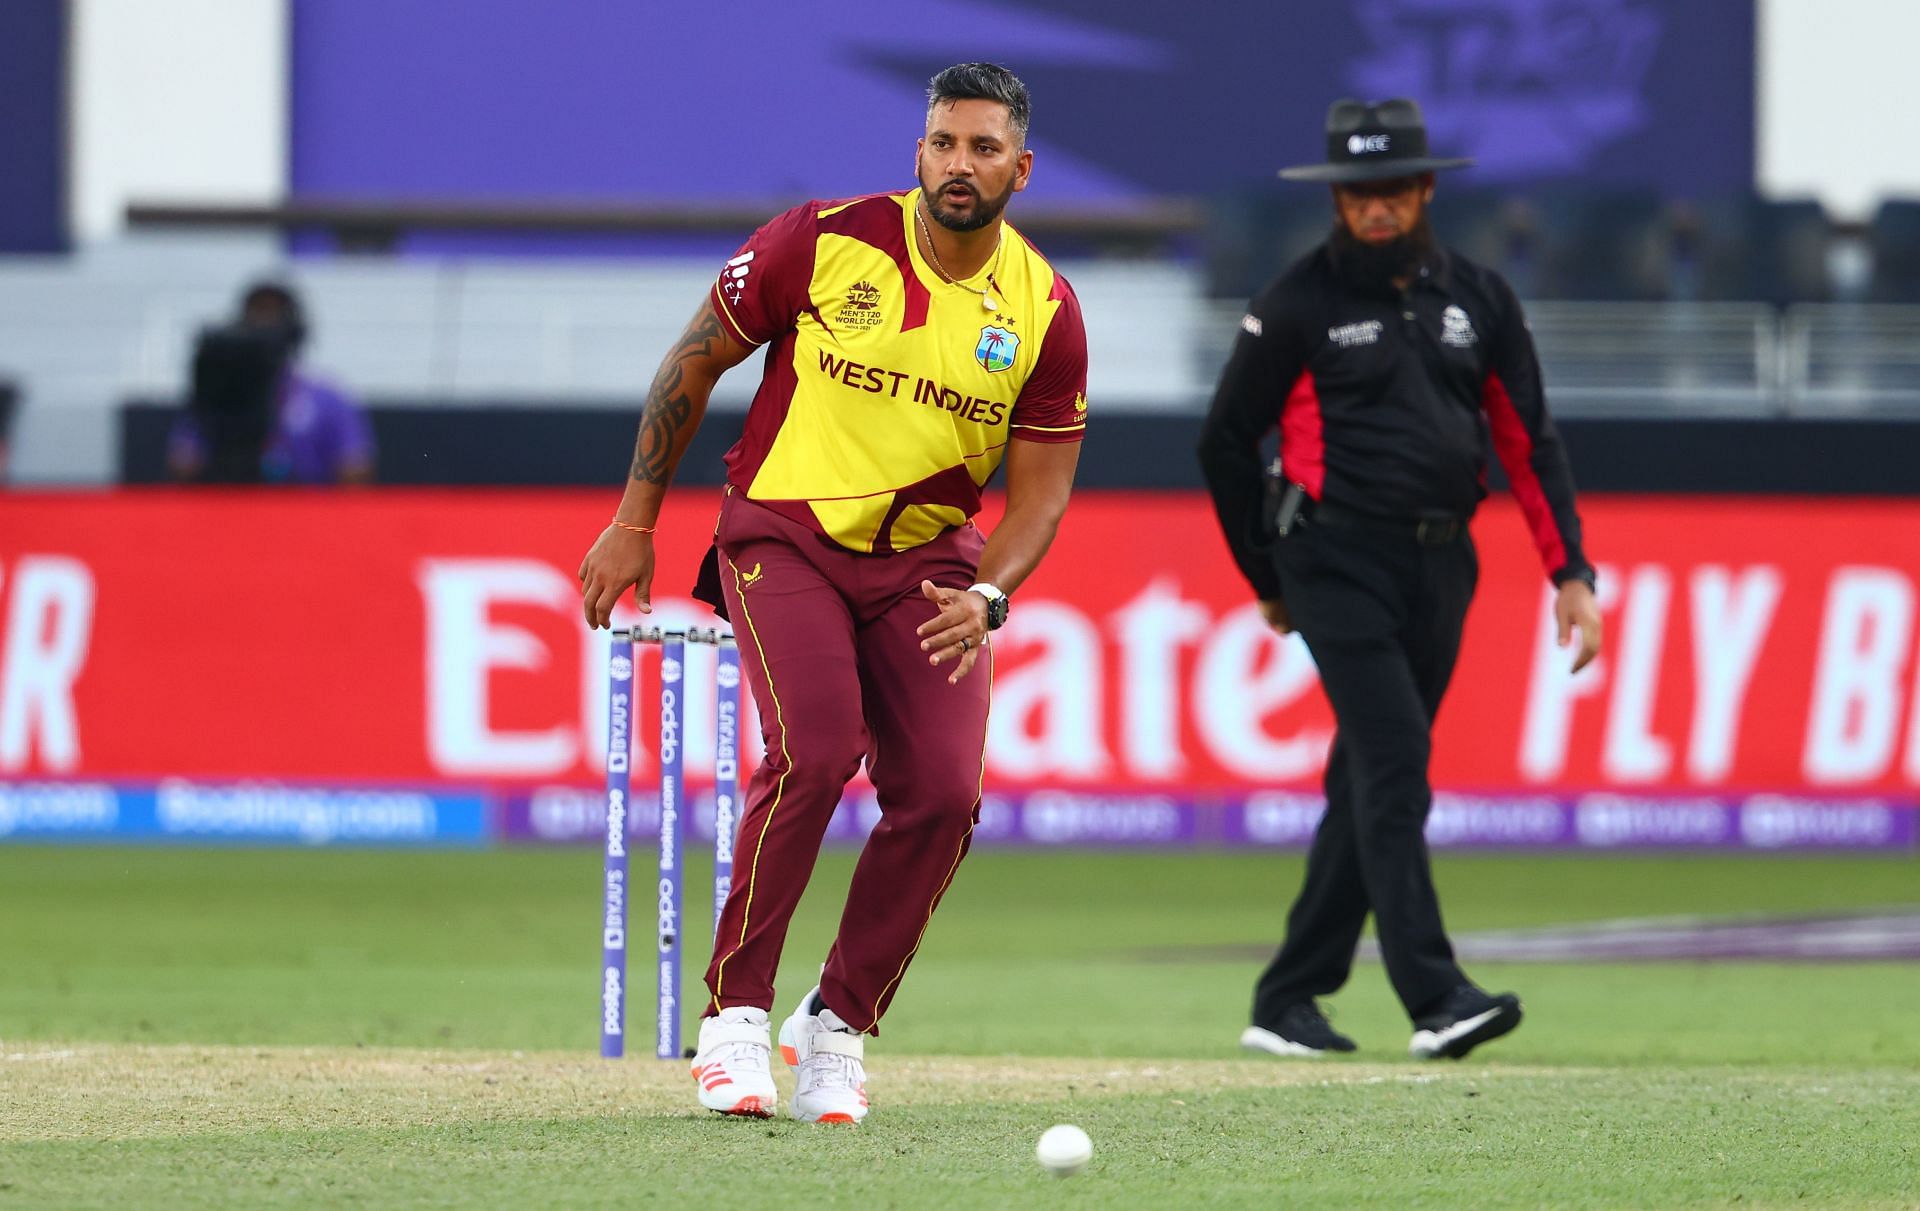 The West Indies bowlers struggled to pick wickets